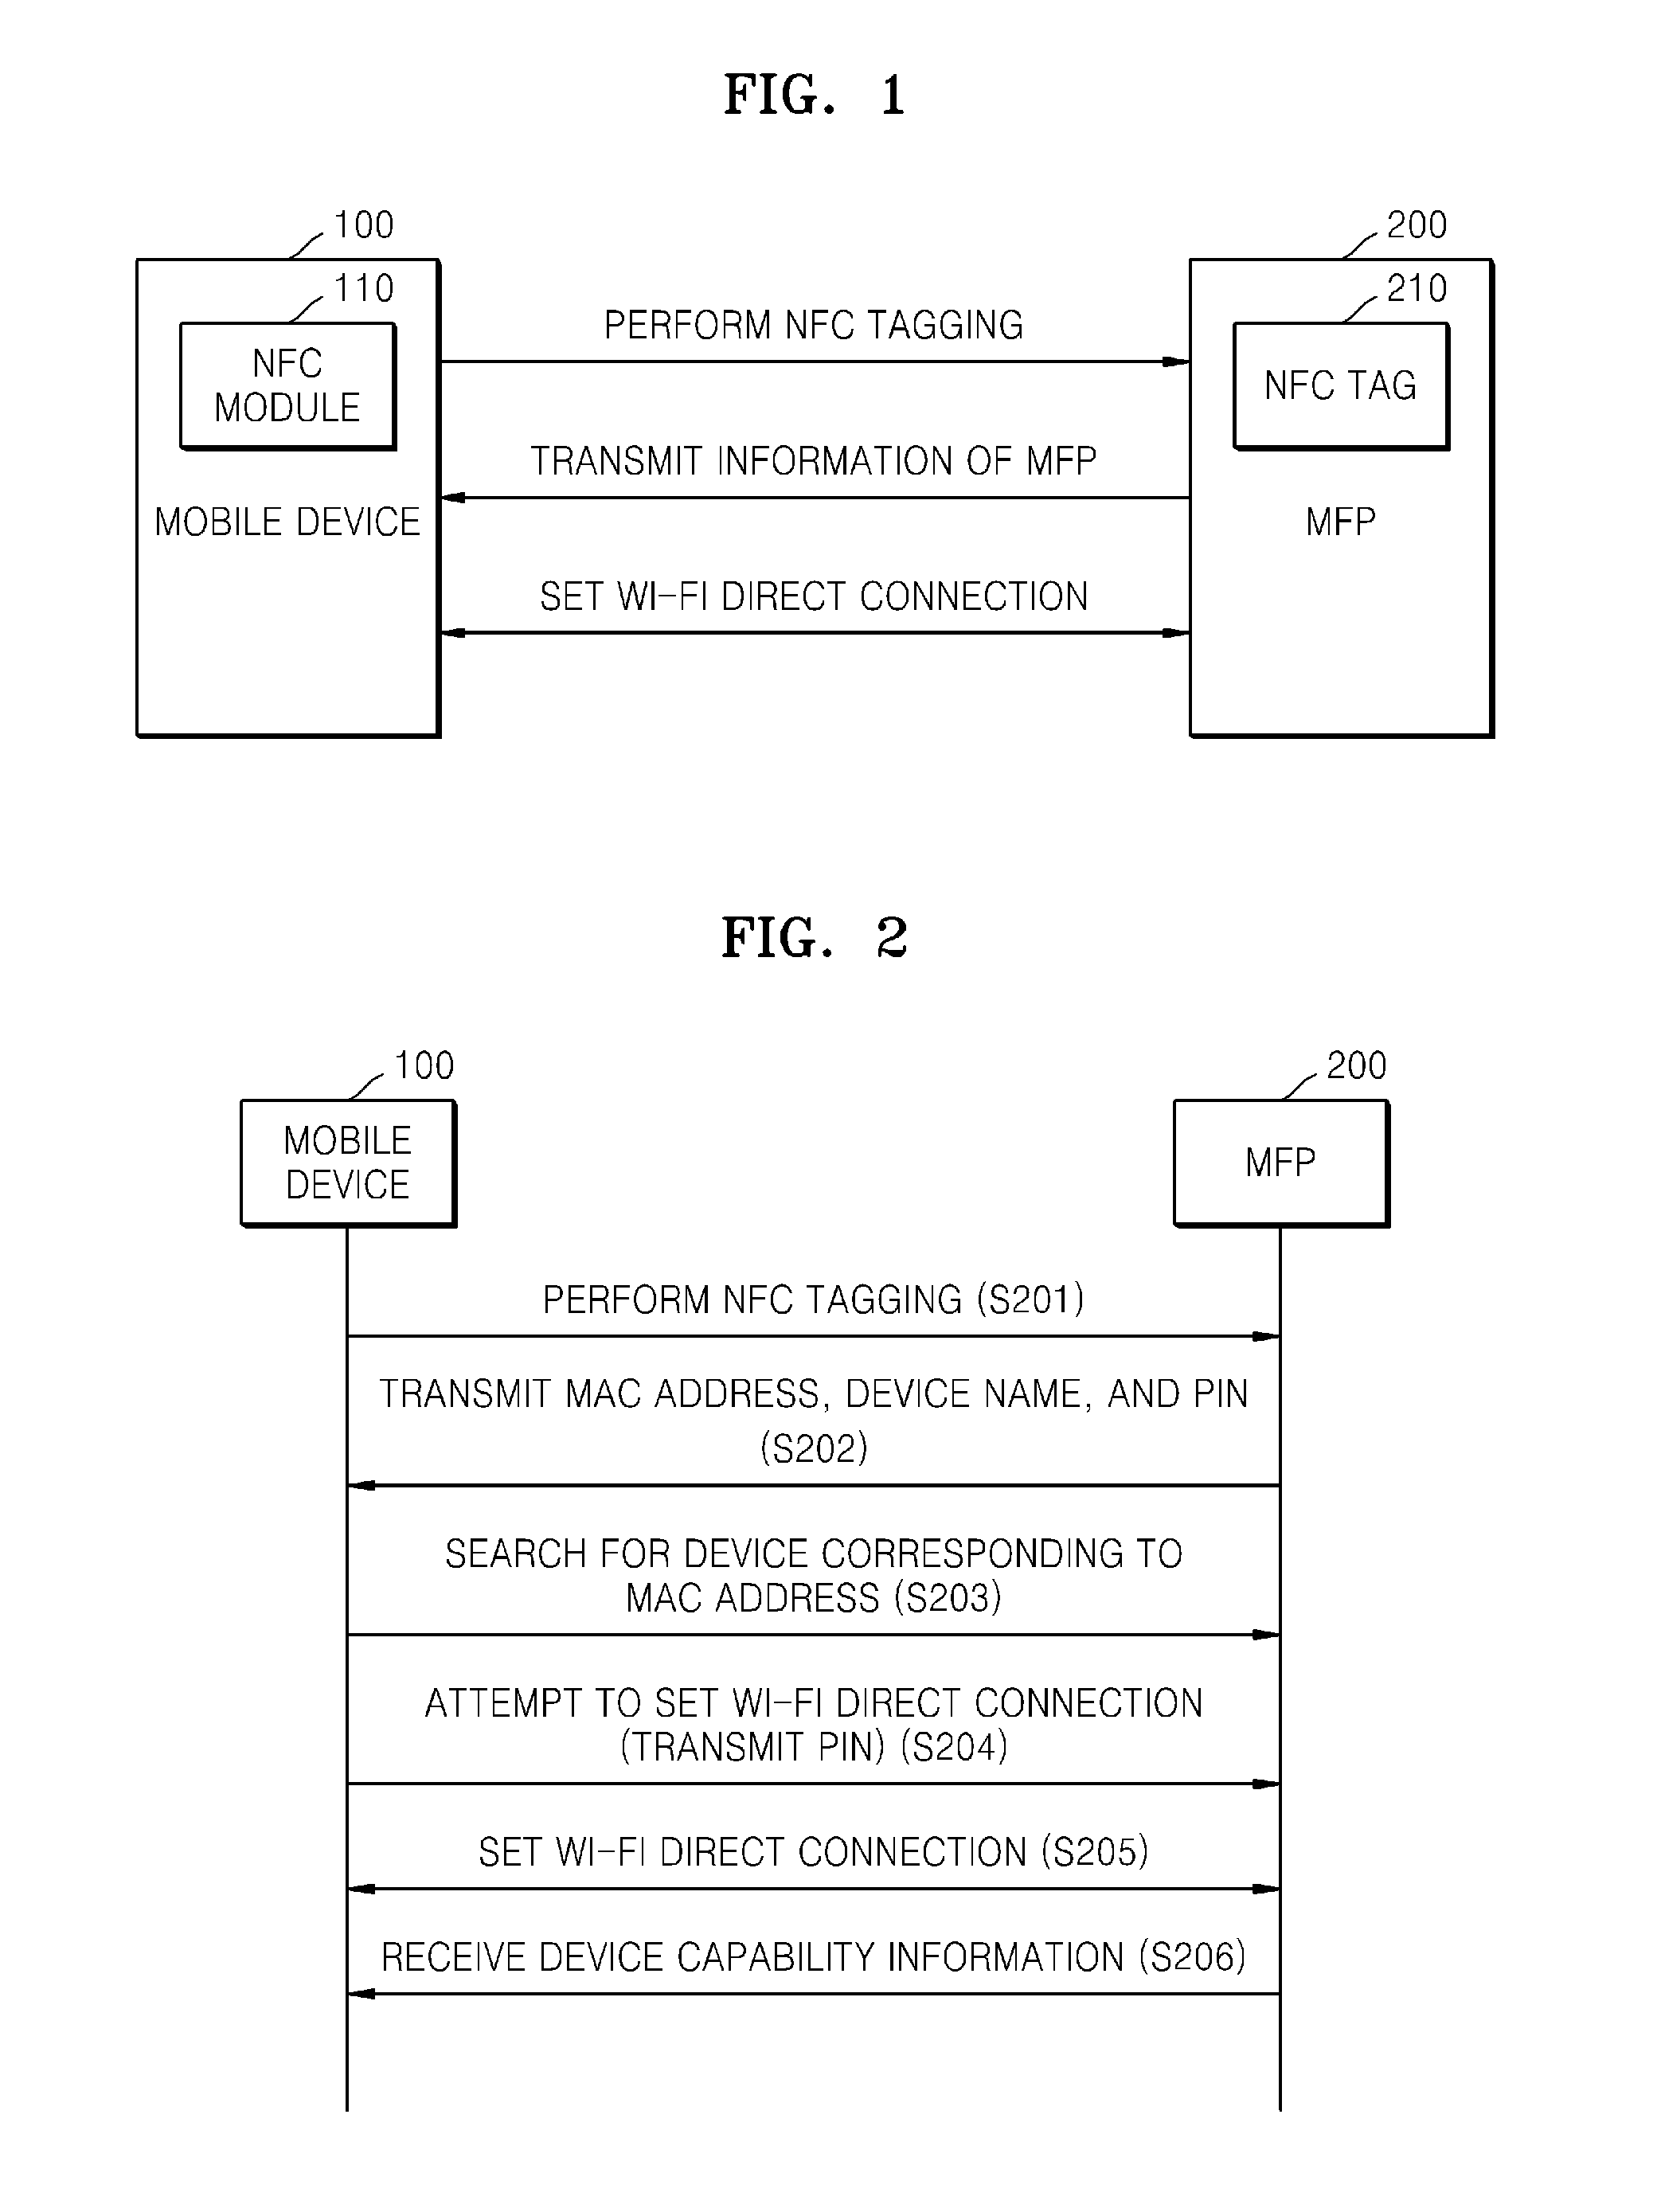 System and method to provide mobile printing using near field communication